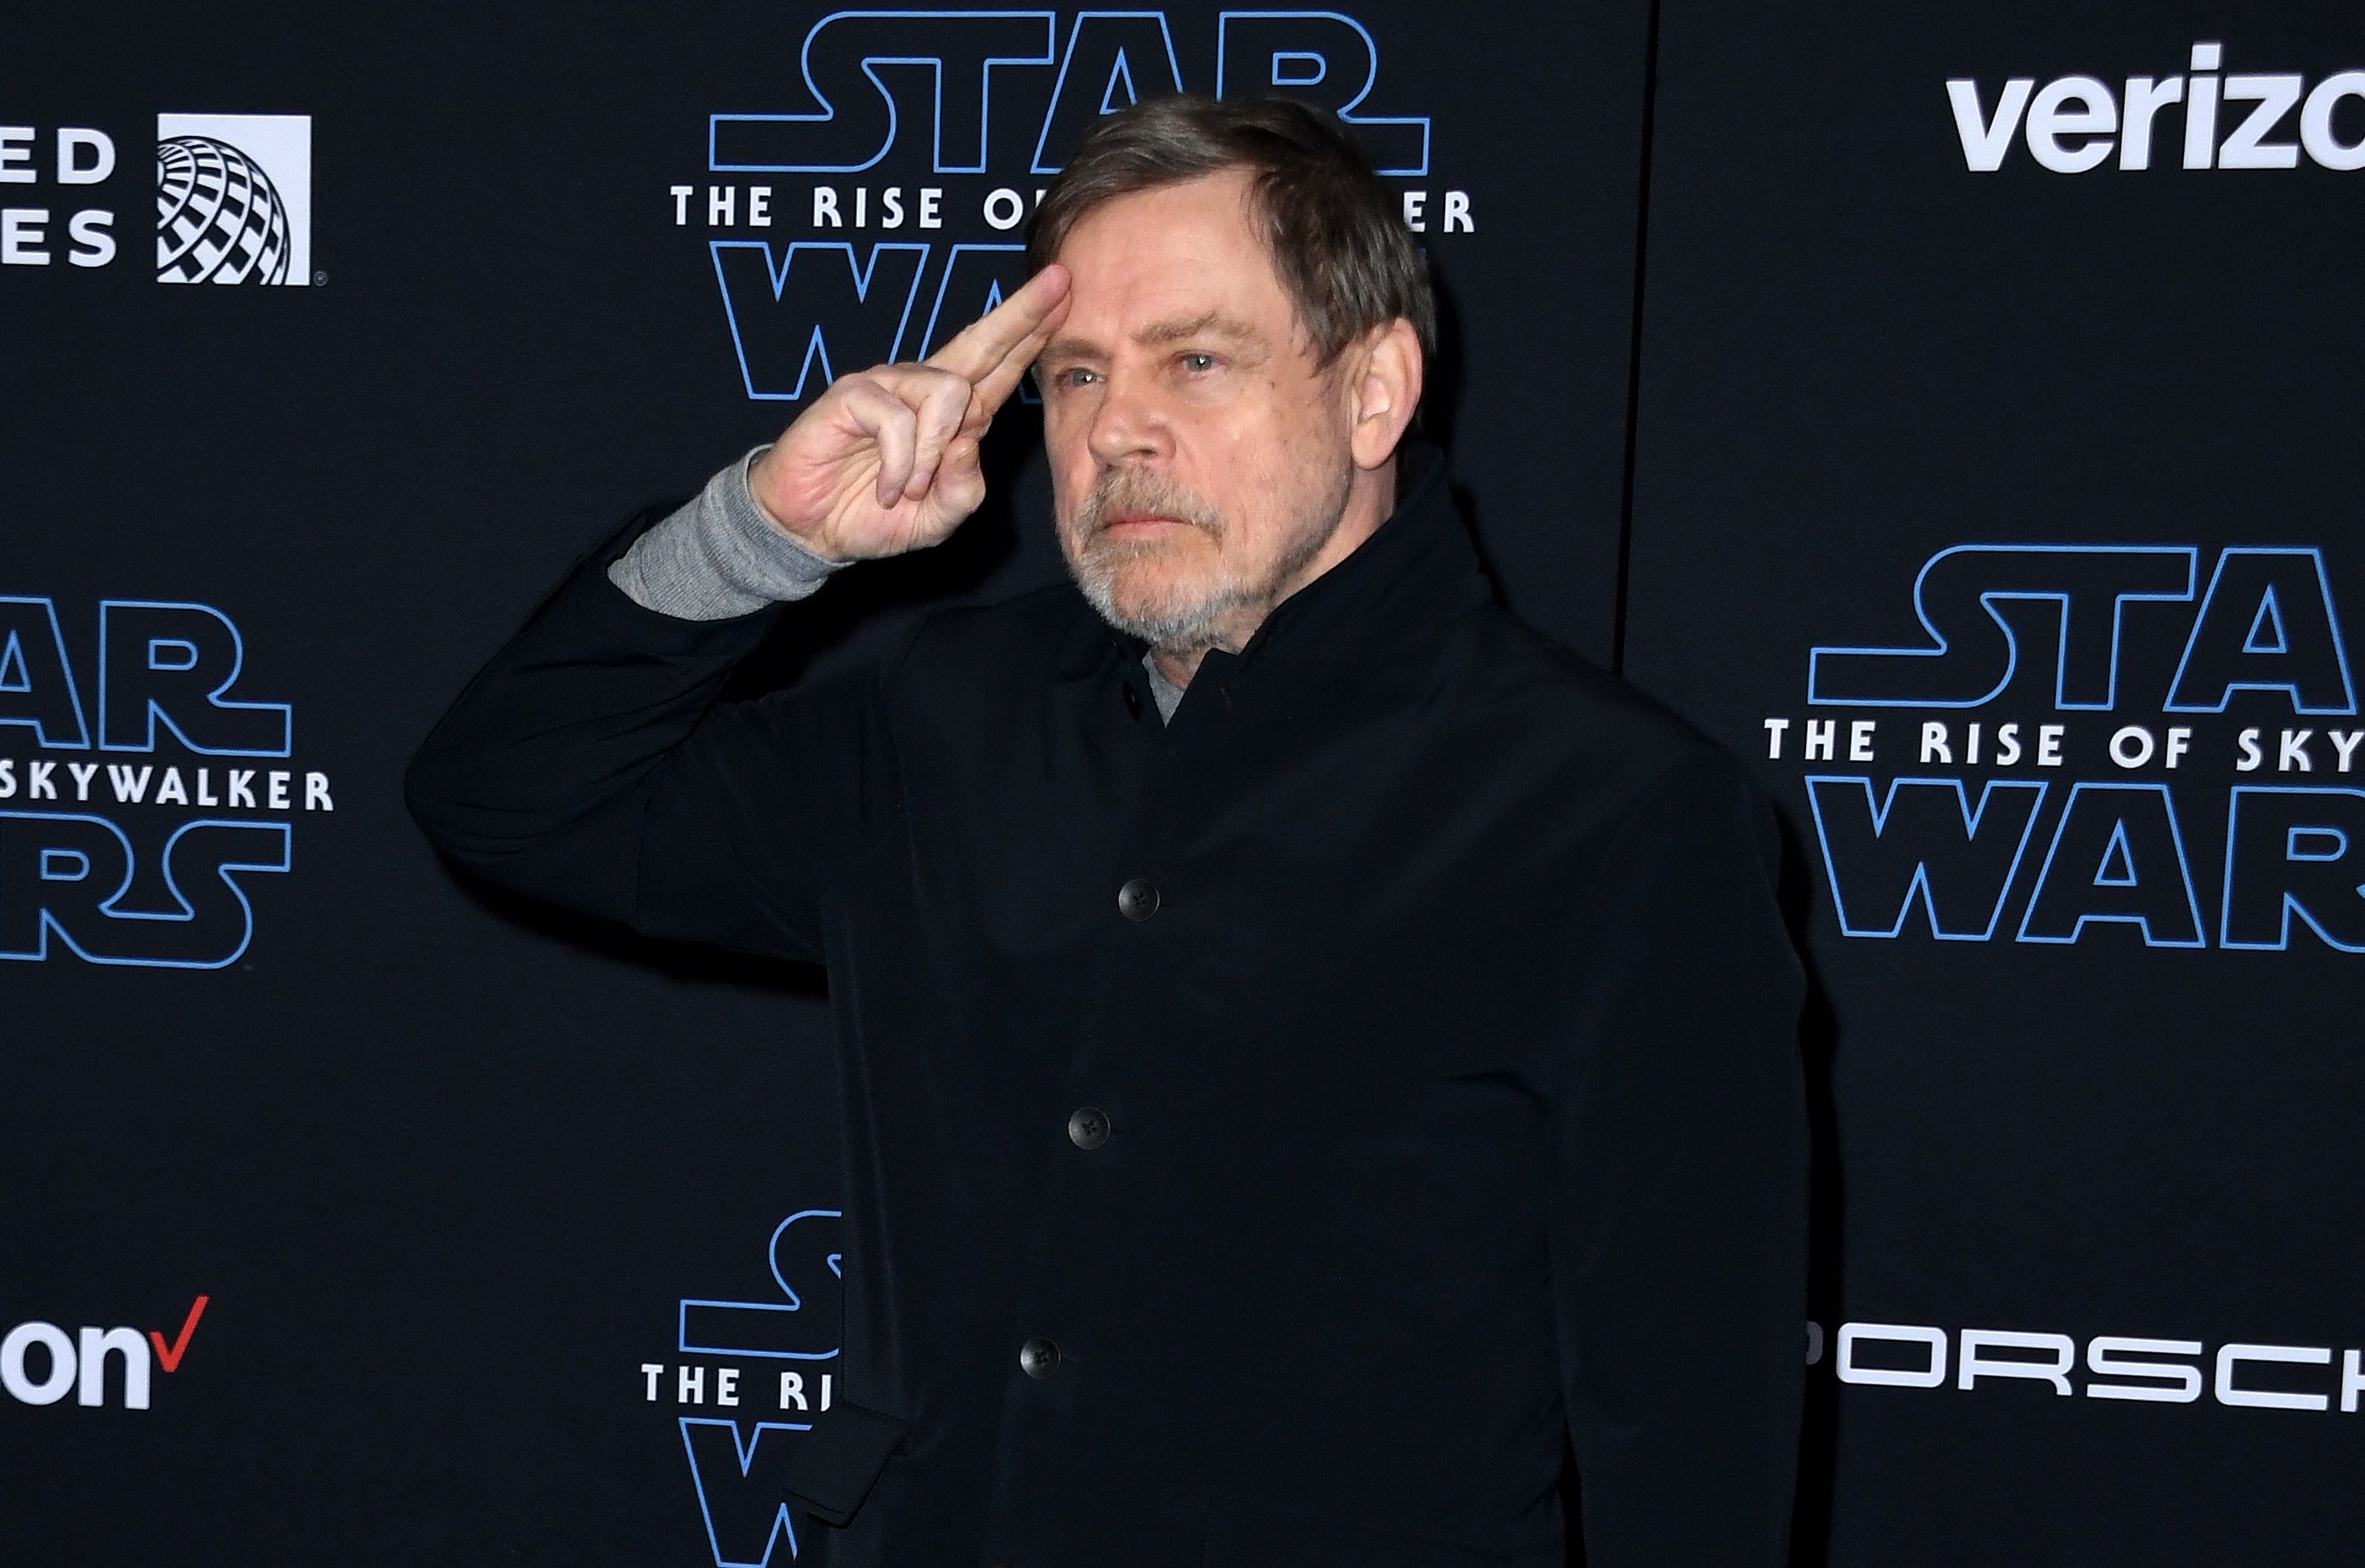 Mark saluting at the Star Wars: The Rise of Skywalker premiere